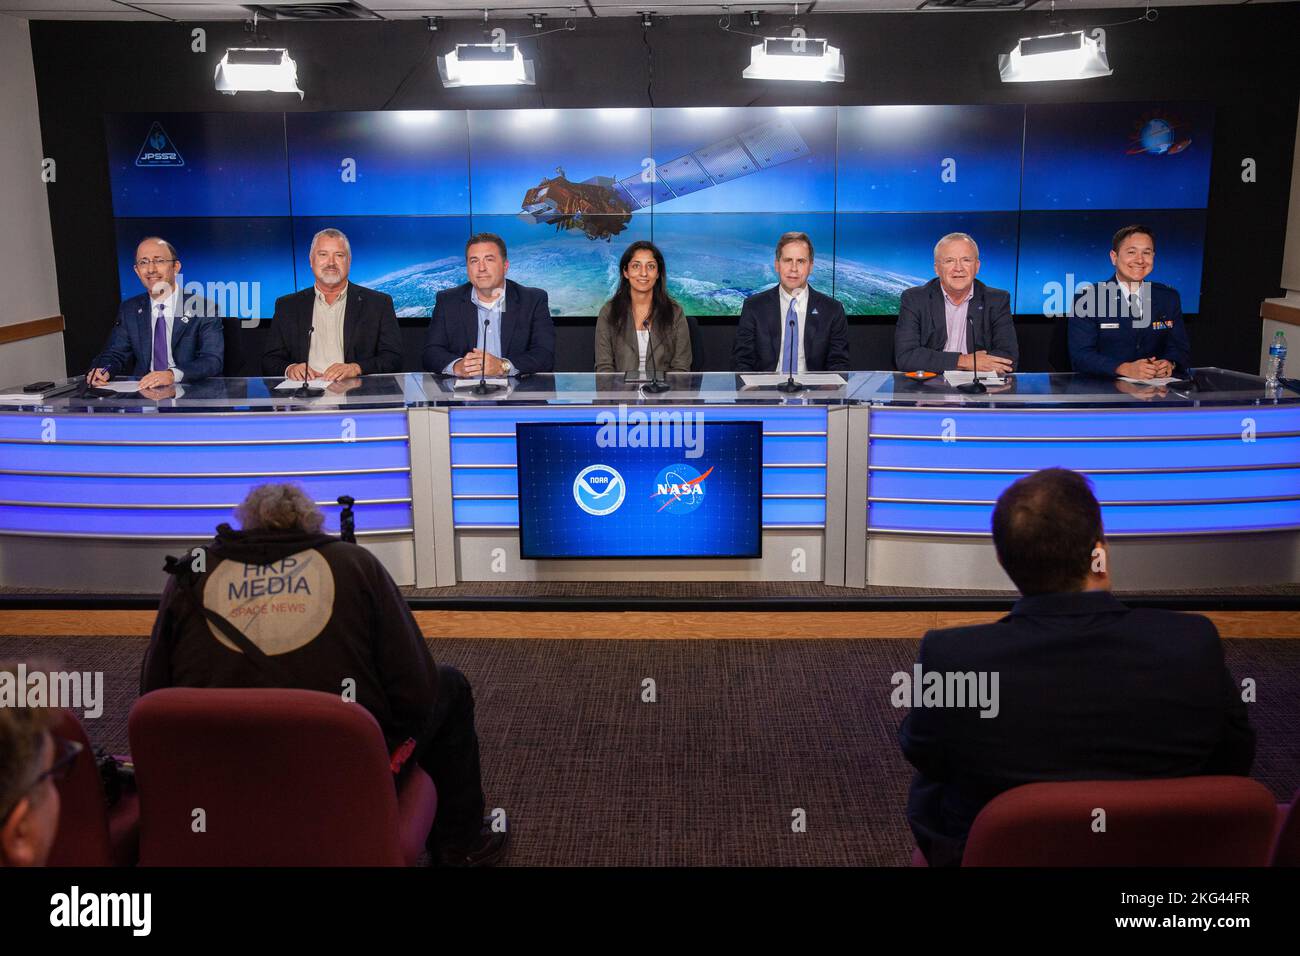 JPSS-2/LOFTID Prelaunch News Conference. NASA held a prelaunch news conference for the National Oceanic and Atmospheric Administration’s (NOAA) Joint Polar Satellite System-2 (JPSS-2) and the agency’s Low-Earth Orbit Flight Test of an Inflatable Decelerator (LOFTID) technology demonstration at Vandenberg Space Force Base in California on Oct. 28, 2022. Participants from left are: John Gagosian, director, NASA’s Joint Agency Satellite Division; Omar Baez, launch director, NASA’s Launch Services Program; Gary Wentz, vice president, Government and Commercial Programs, ULA; Irene Parker, deputy as Stock Photo